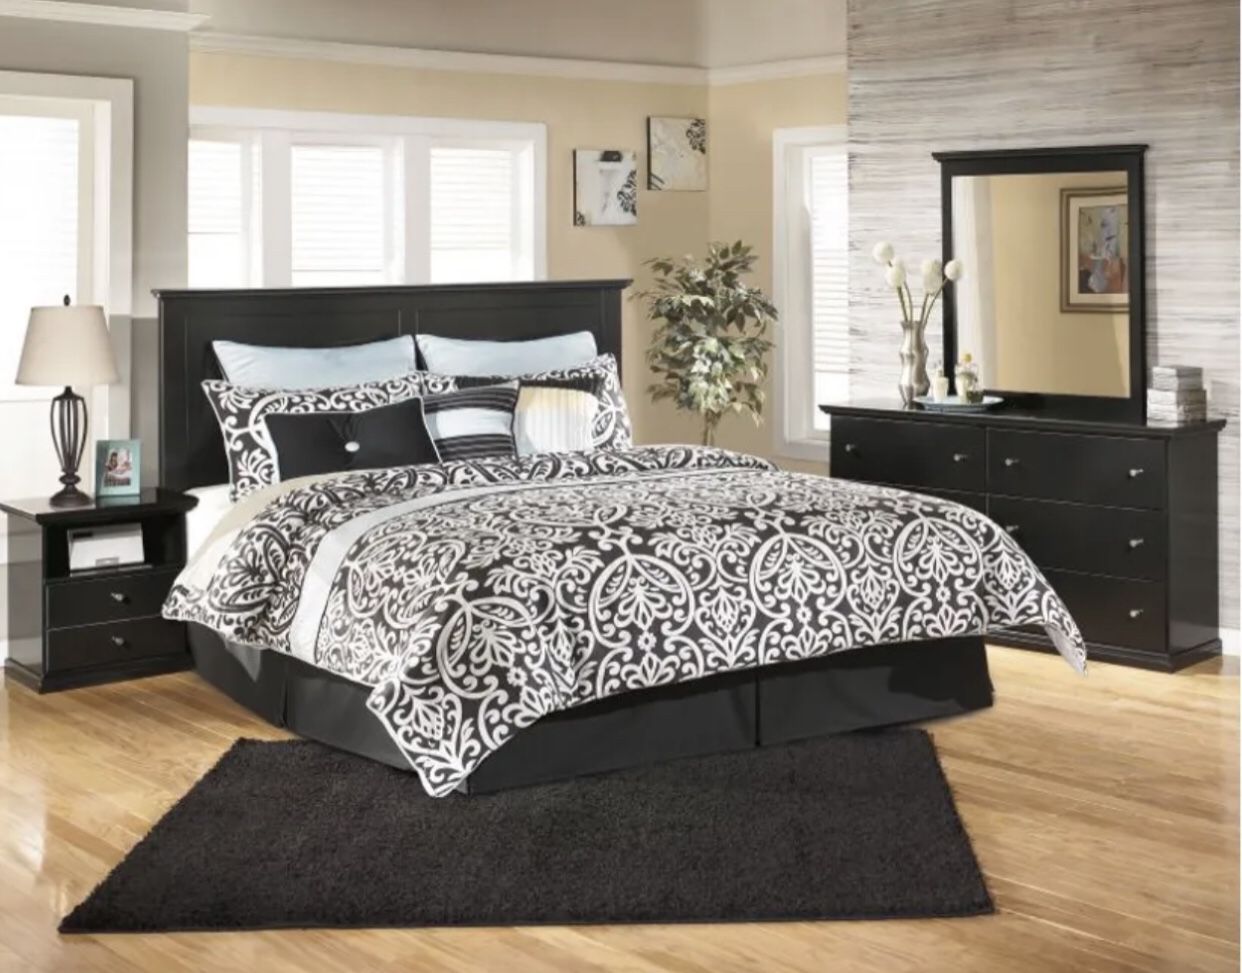 King bed frame with nightstand and dresser